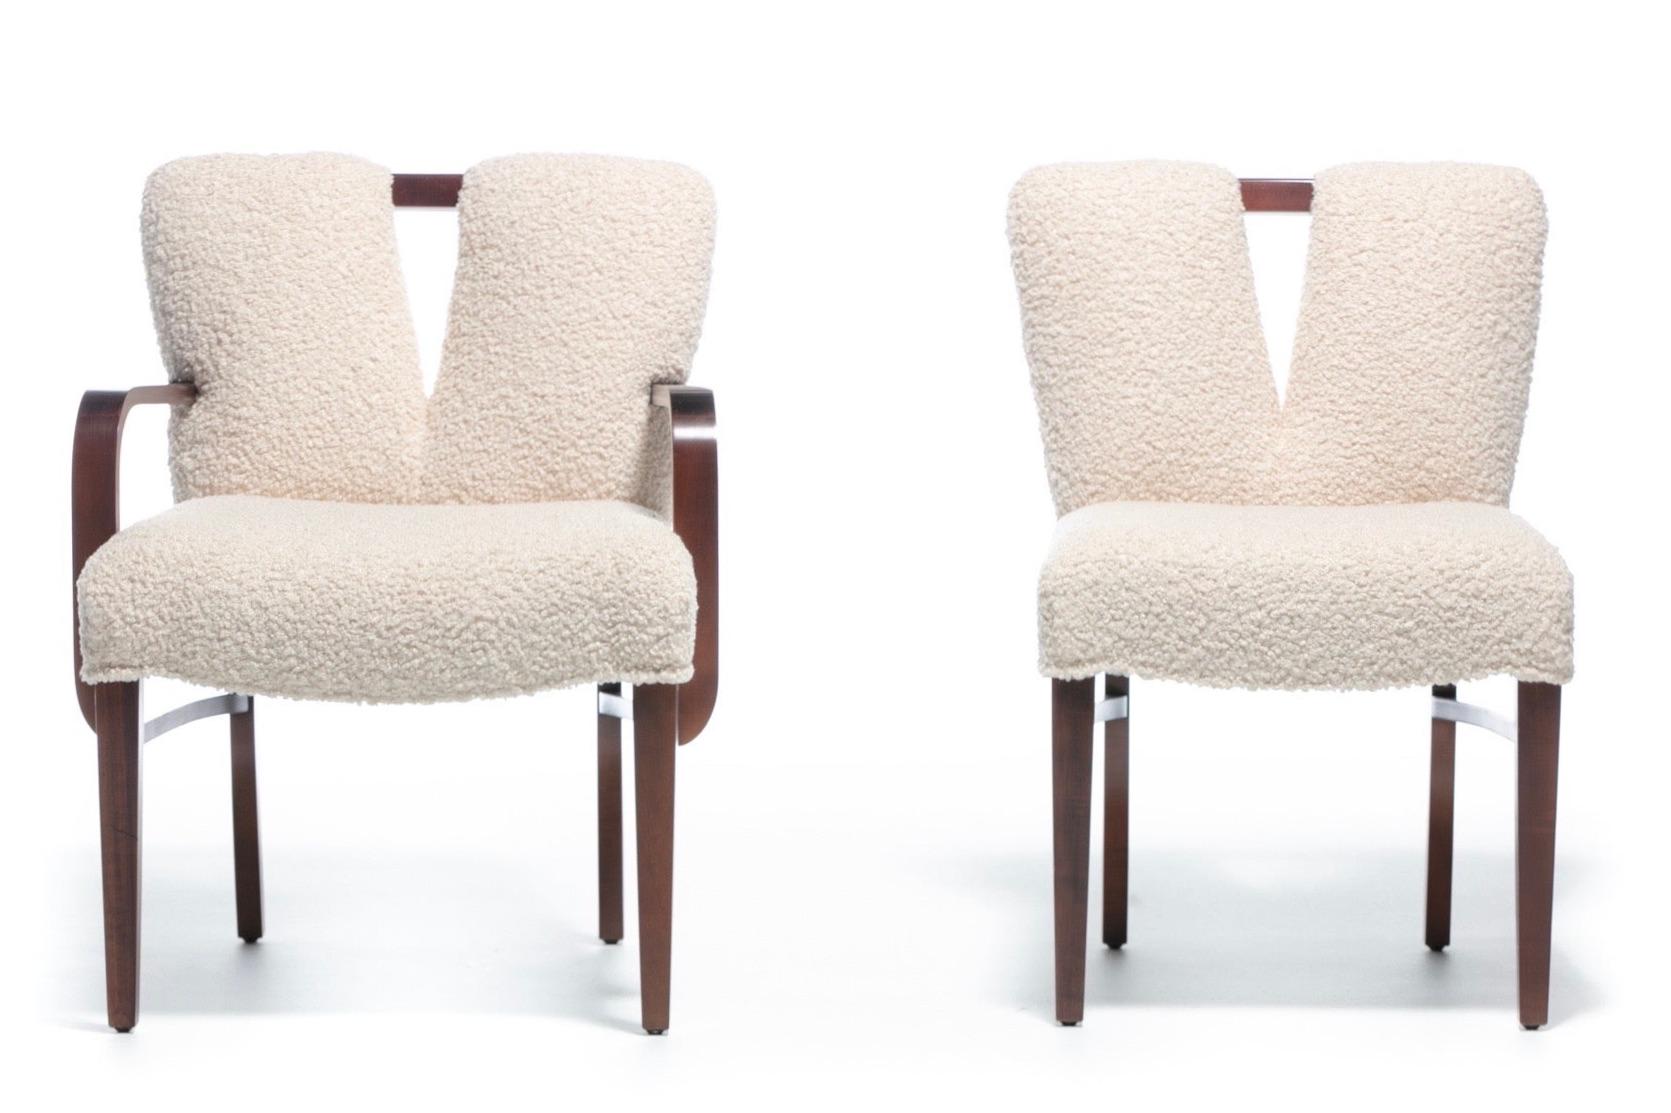 We are pleased to offer this one of a kind exquisitely large set of 18 Paul Frankl plunging corset dining chairs for Johnson Furniture, circa 1950 professionally reupholstered in ivory white bouclé. The backs feature Frankl's iconic 